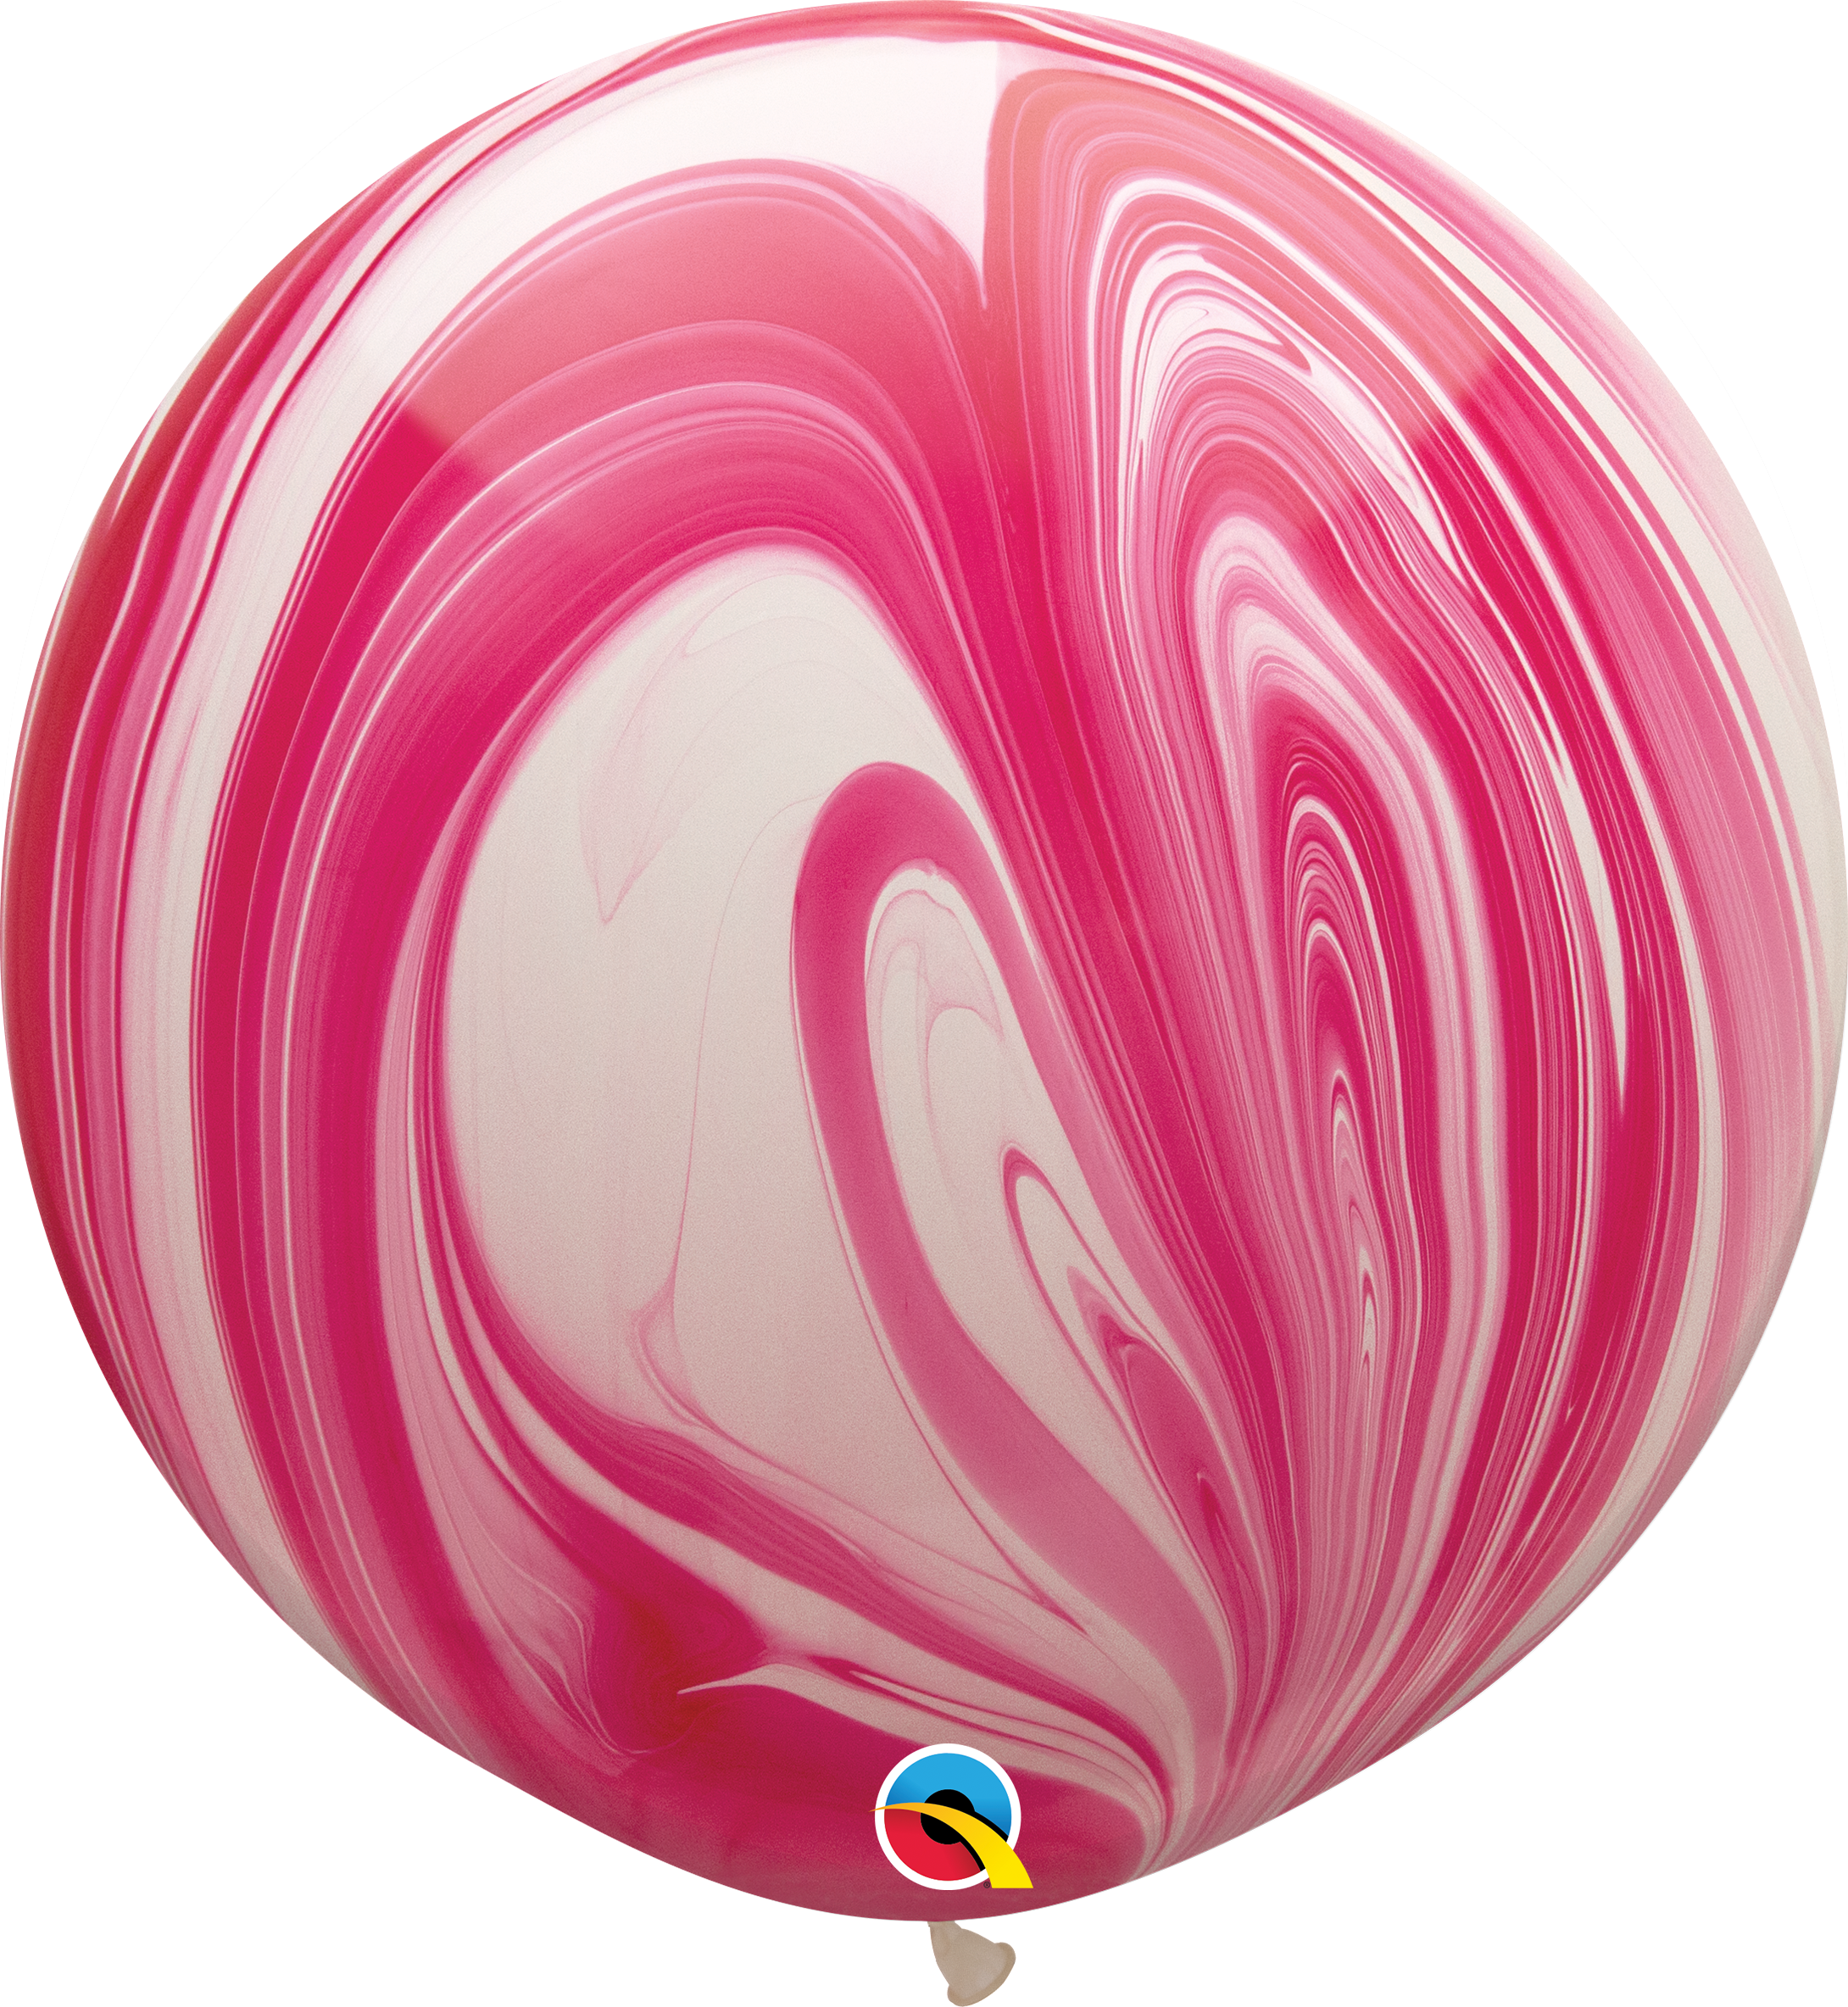 30" Qualatex Red & White SuperAgate Latex Balloons | 2 Count